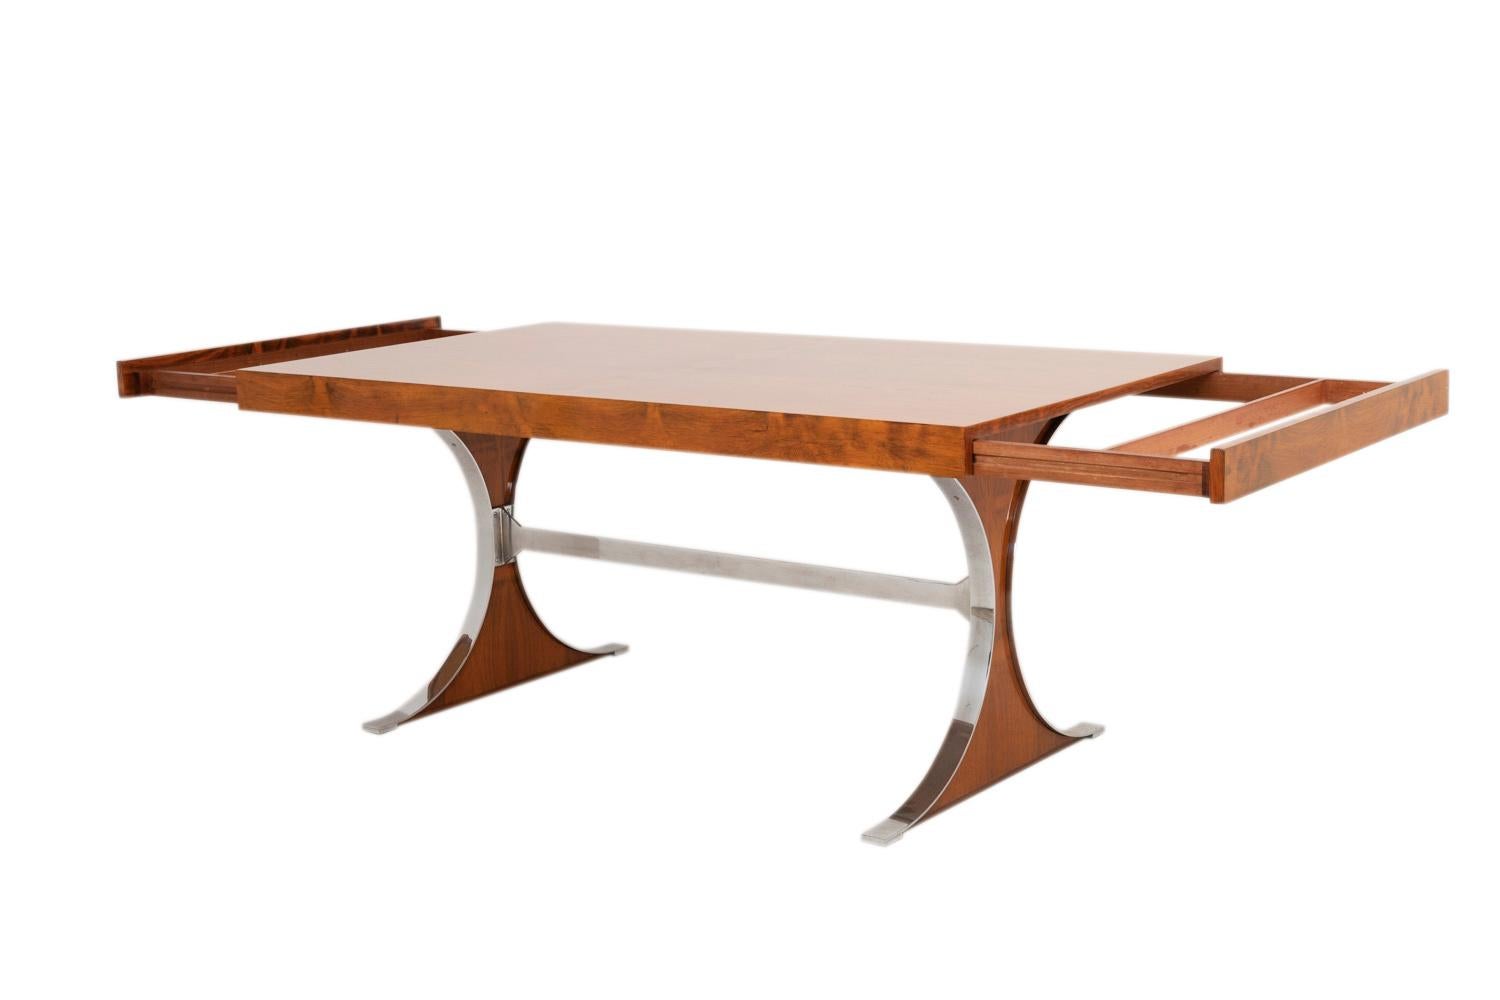 French R.-J. Caillette, Sylvie Table, Rosewood and Stainless Steel, Charron Ed., 1961